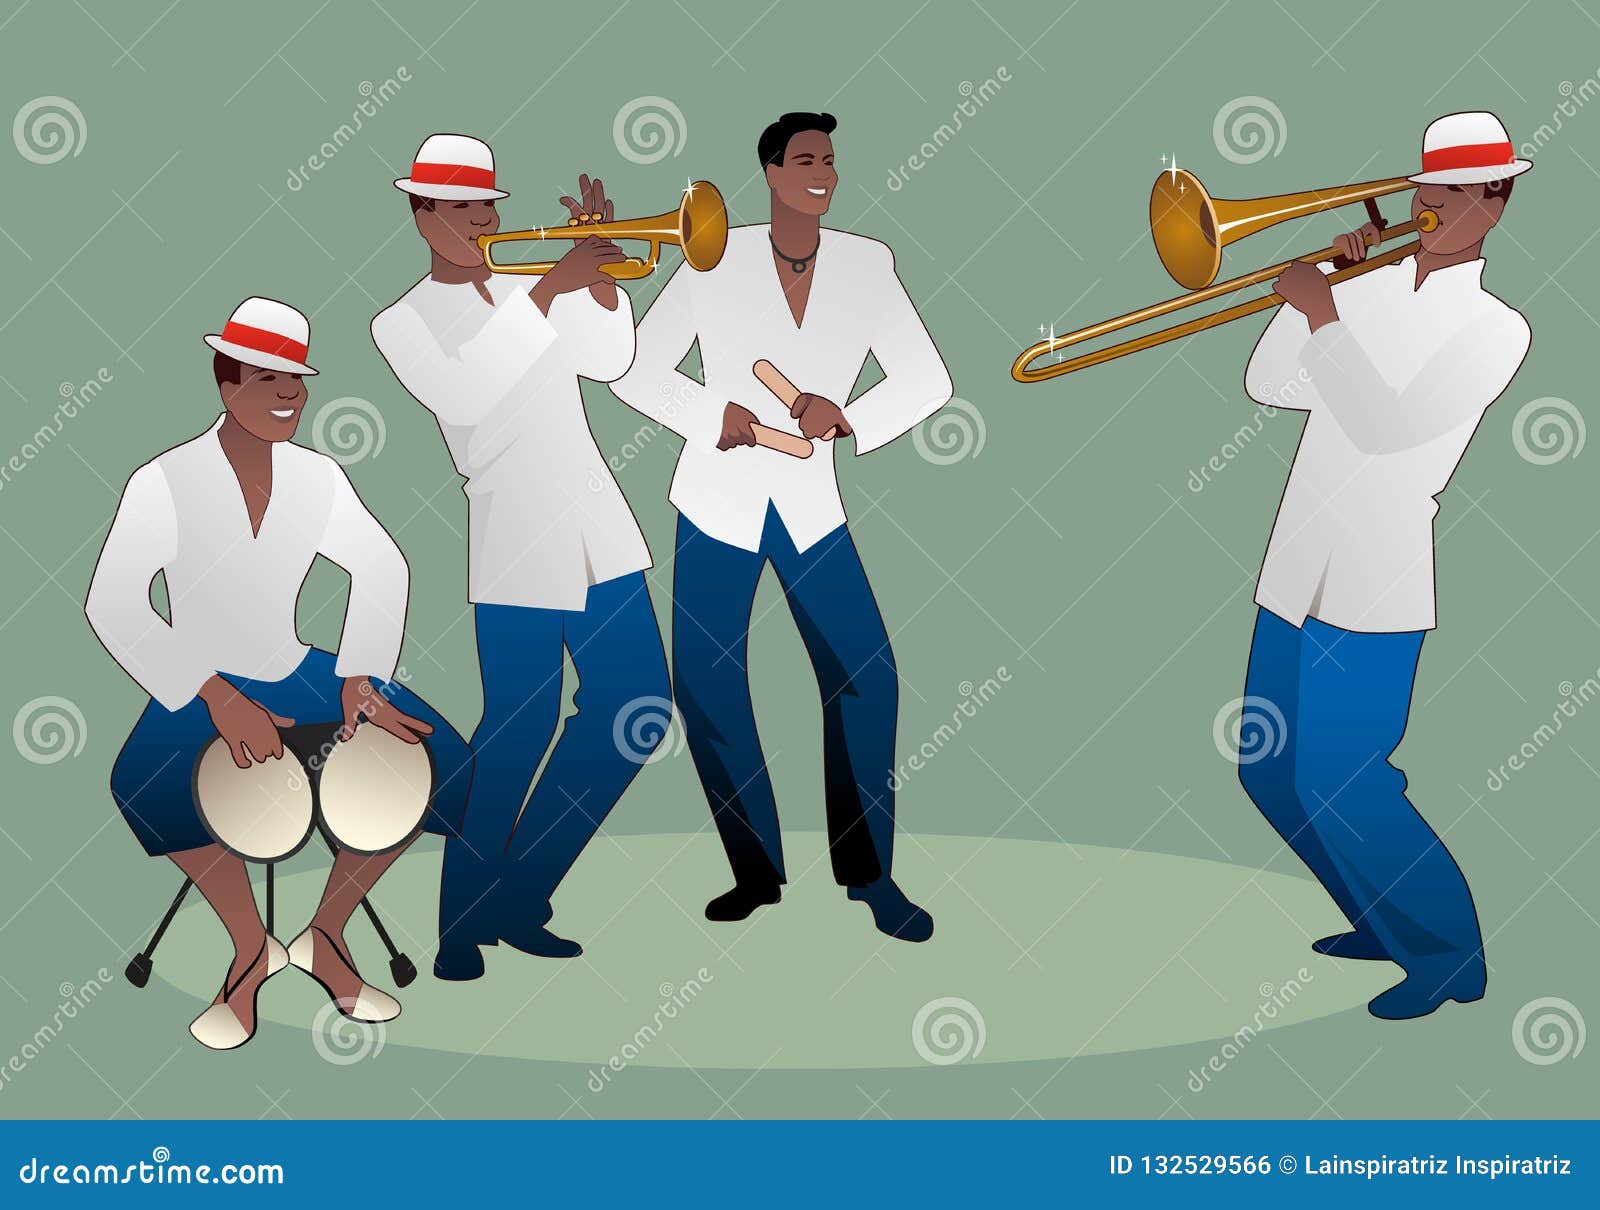 latin band. four latin musicians playing bongos, trumpet, claves and trombone